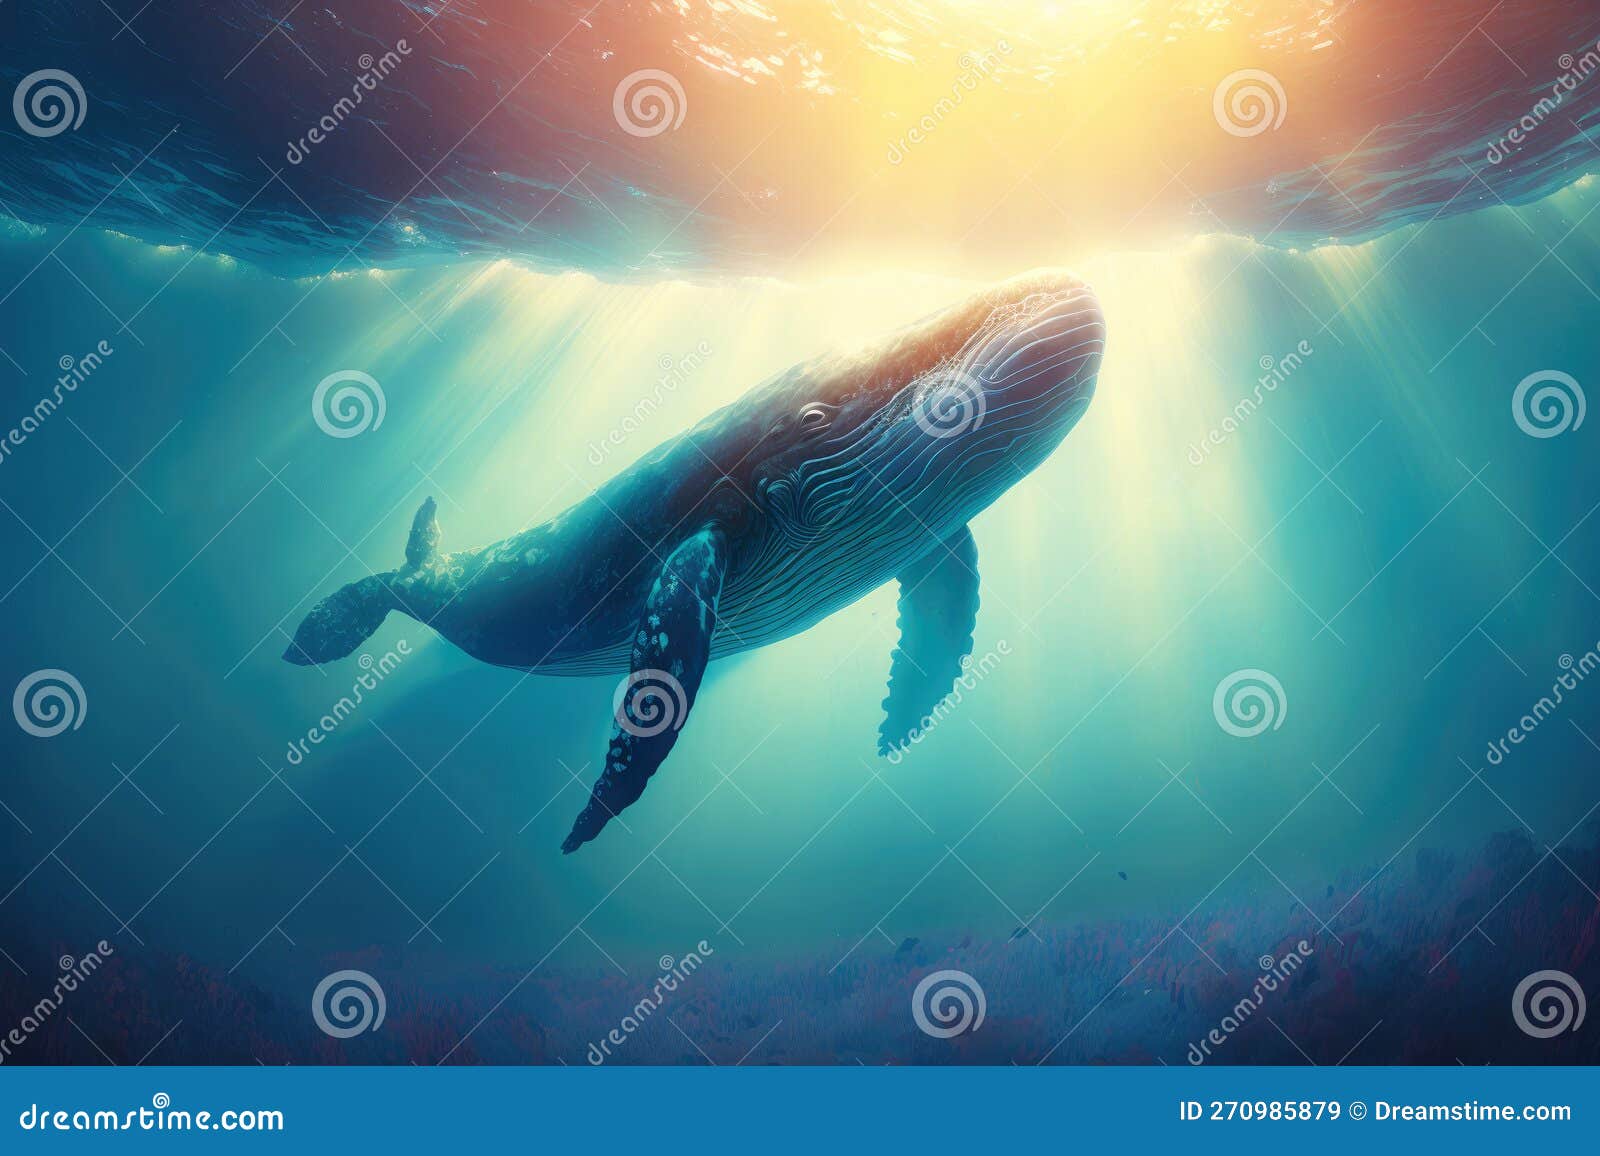 jumping whale Live Wallpaper - free download